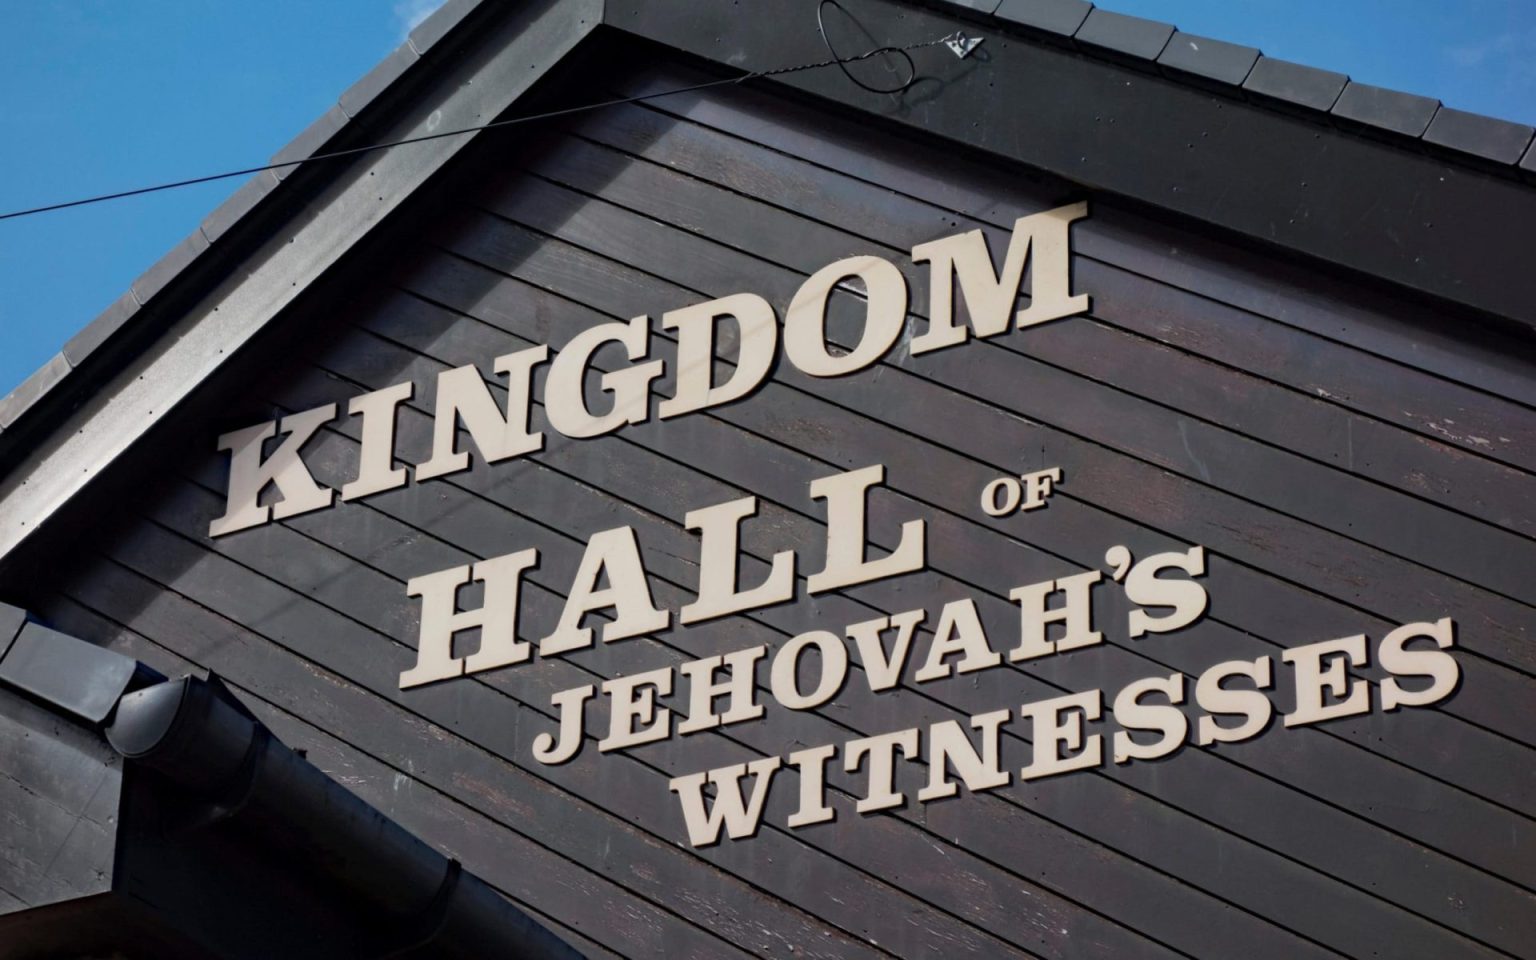 Jehovah witnesses to hold annual convention Asberth News Network